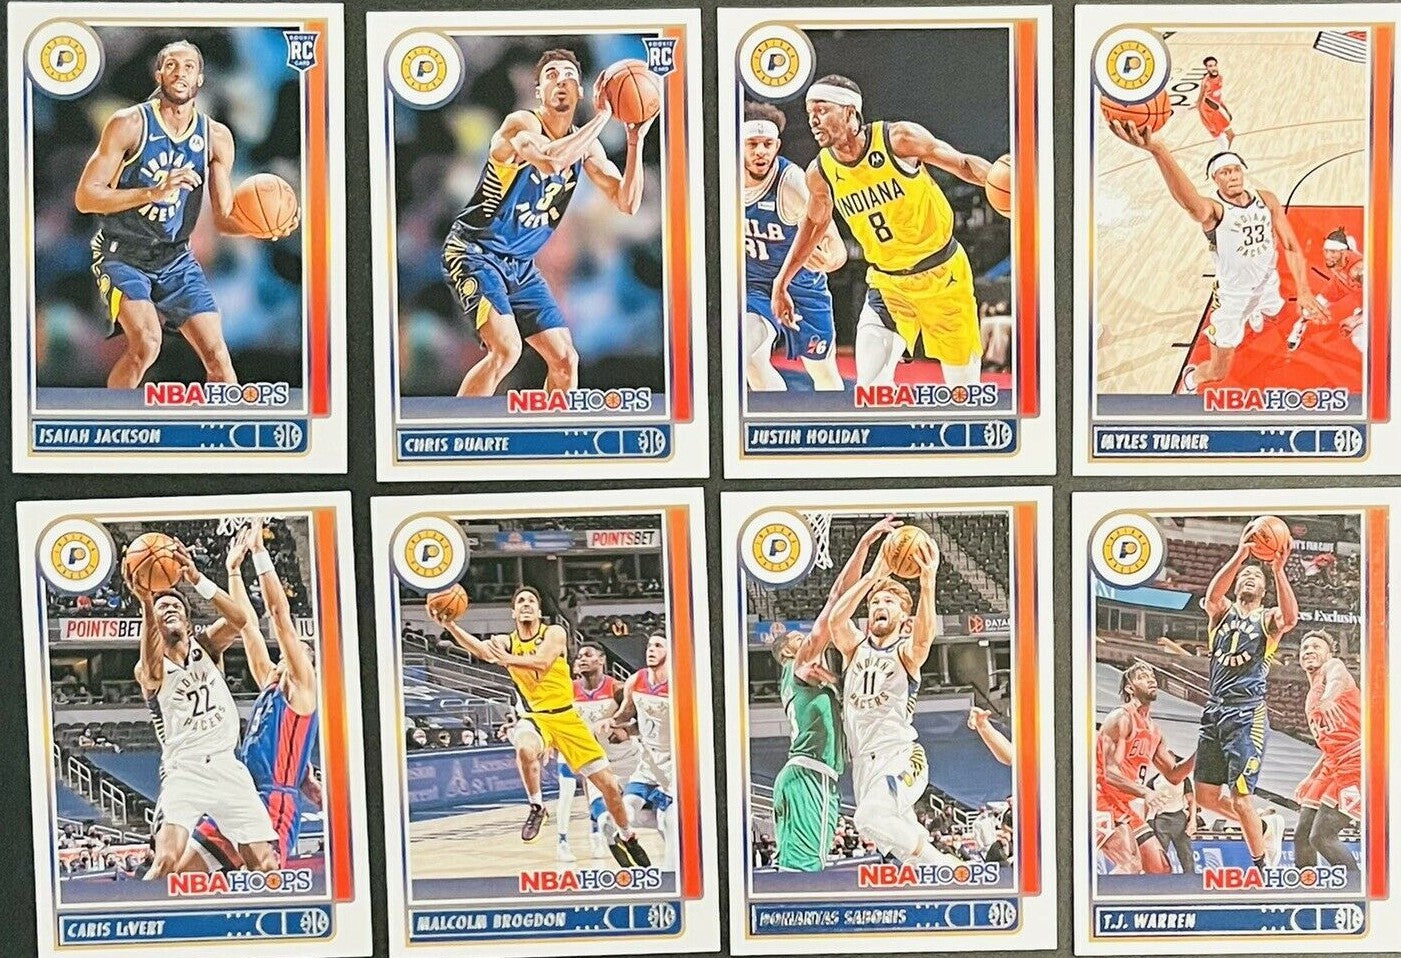  2004-05 Topps Basketball Team Set - Indiana Pacers :  Collectibles & Fine Art